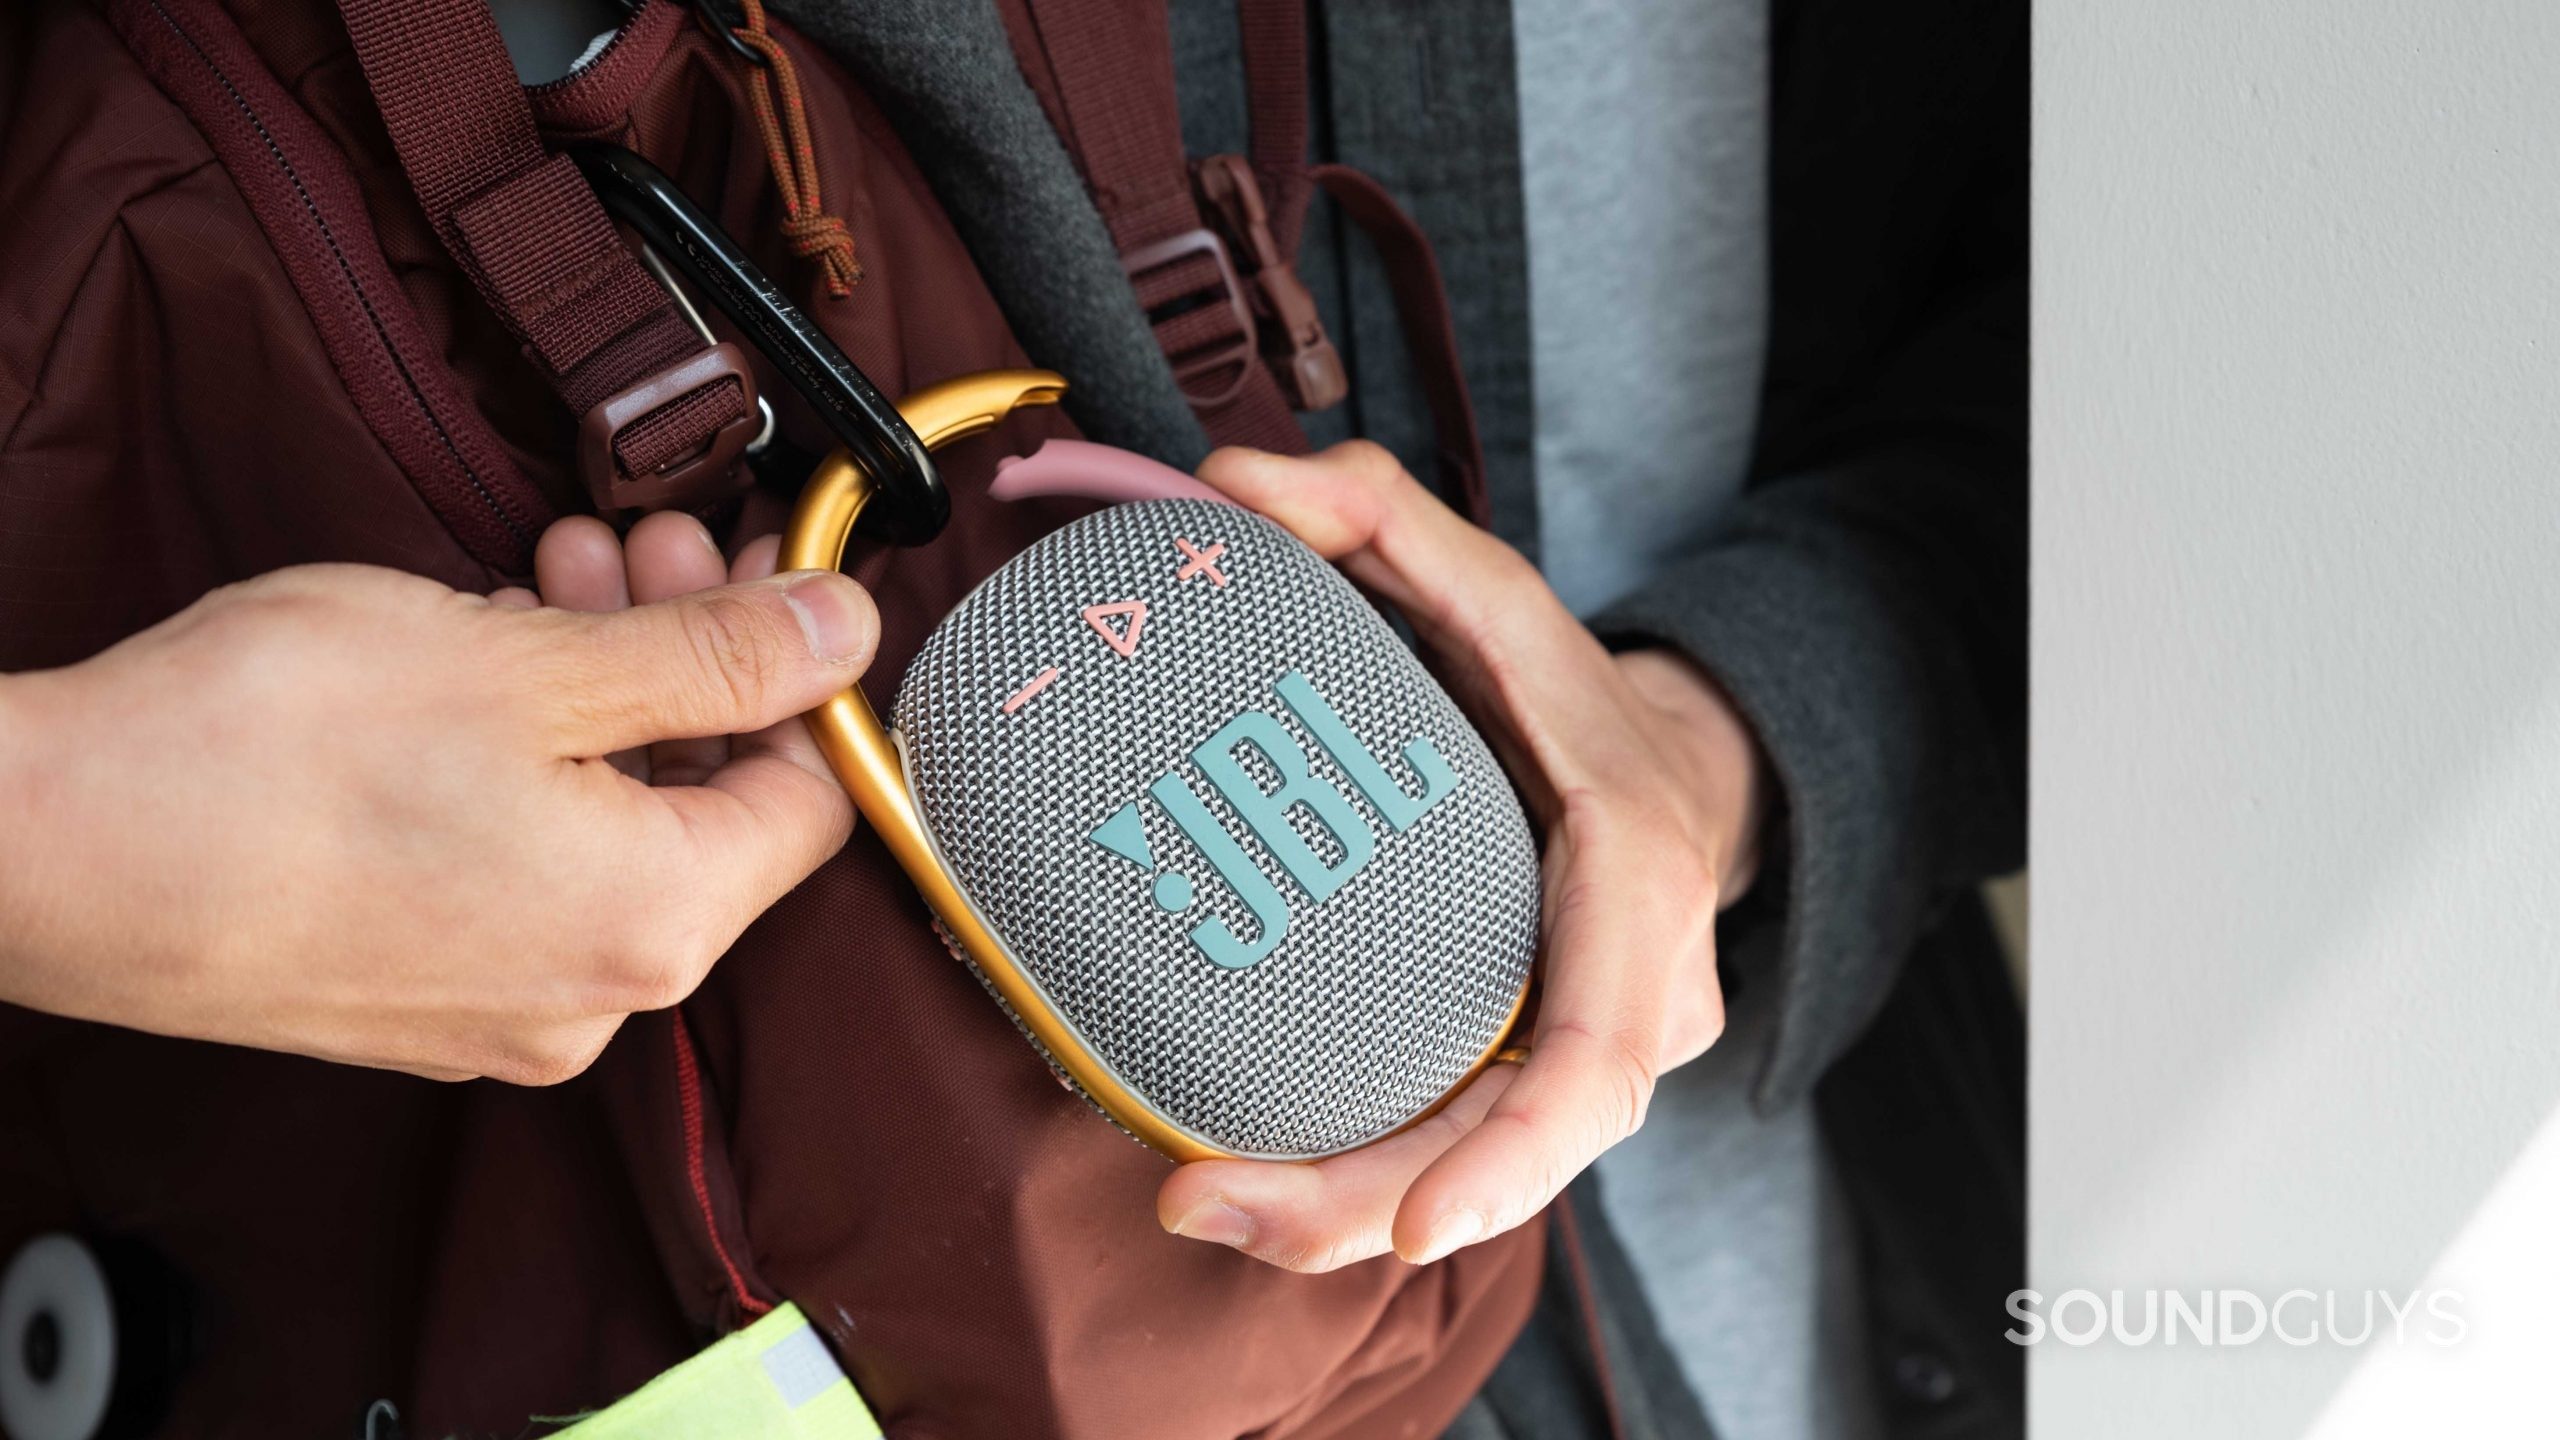 JBL Clip 4 anywhere - music your SoundGuys review: Bring